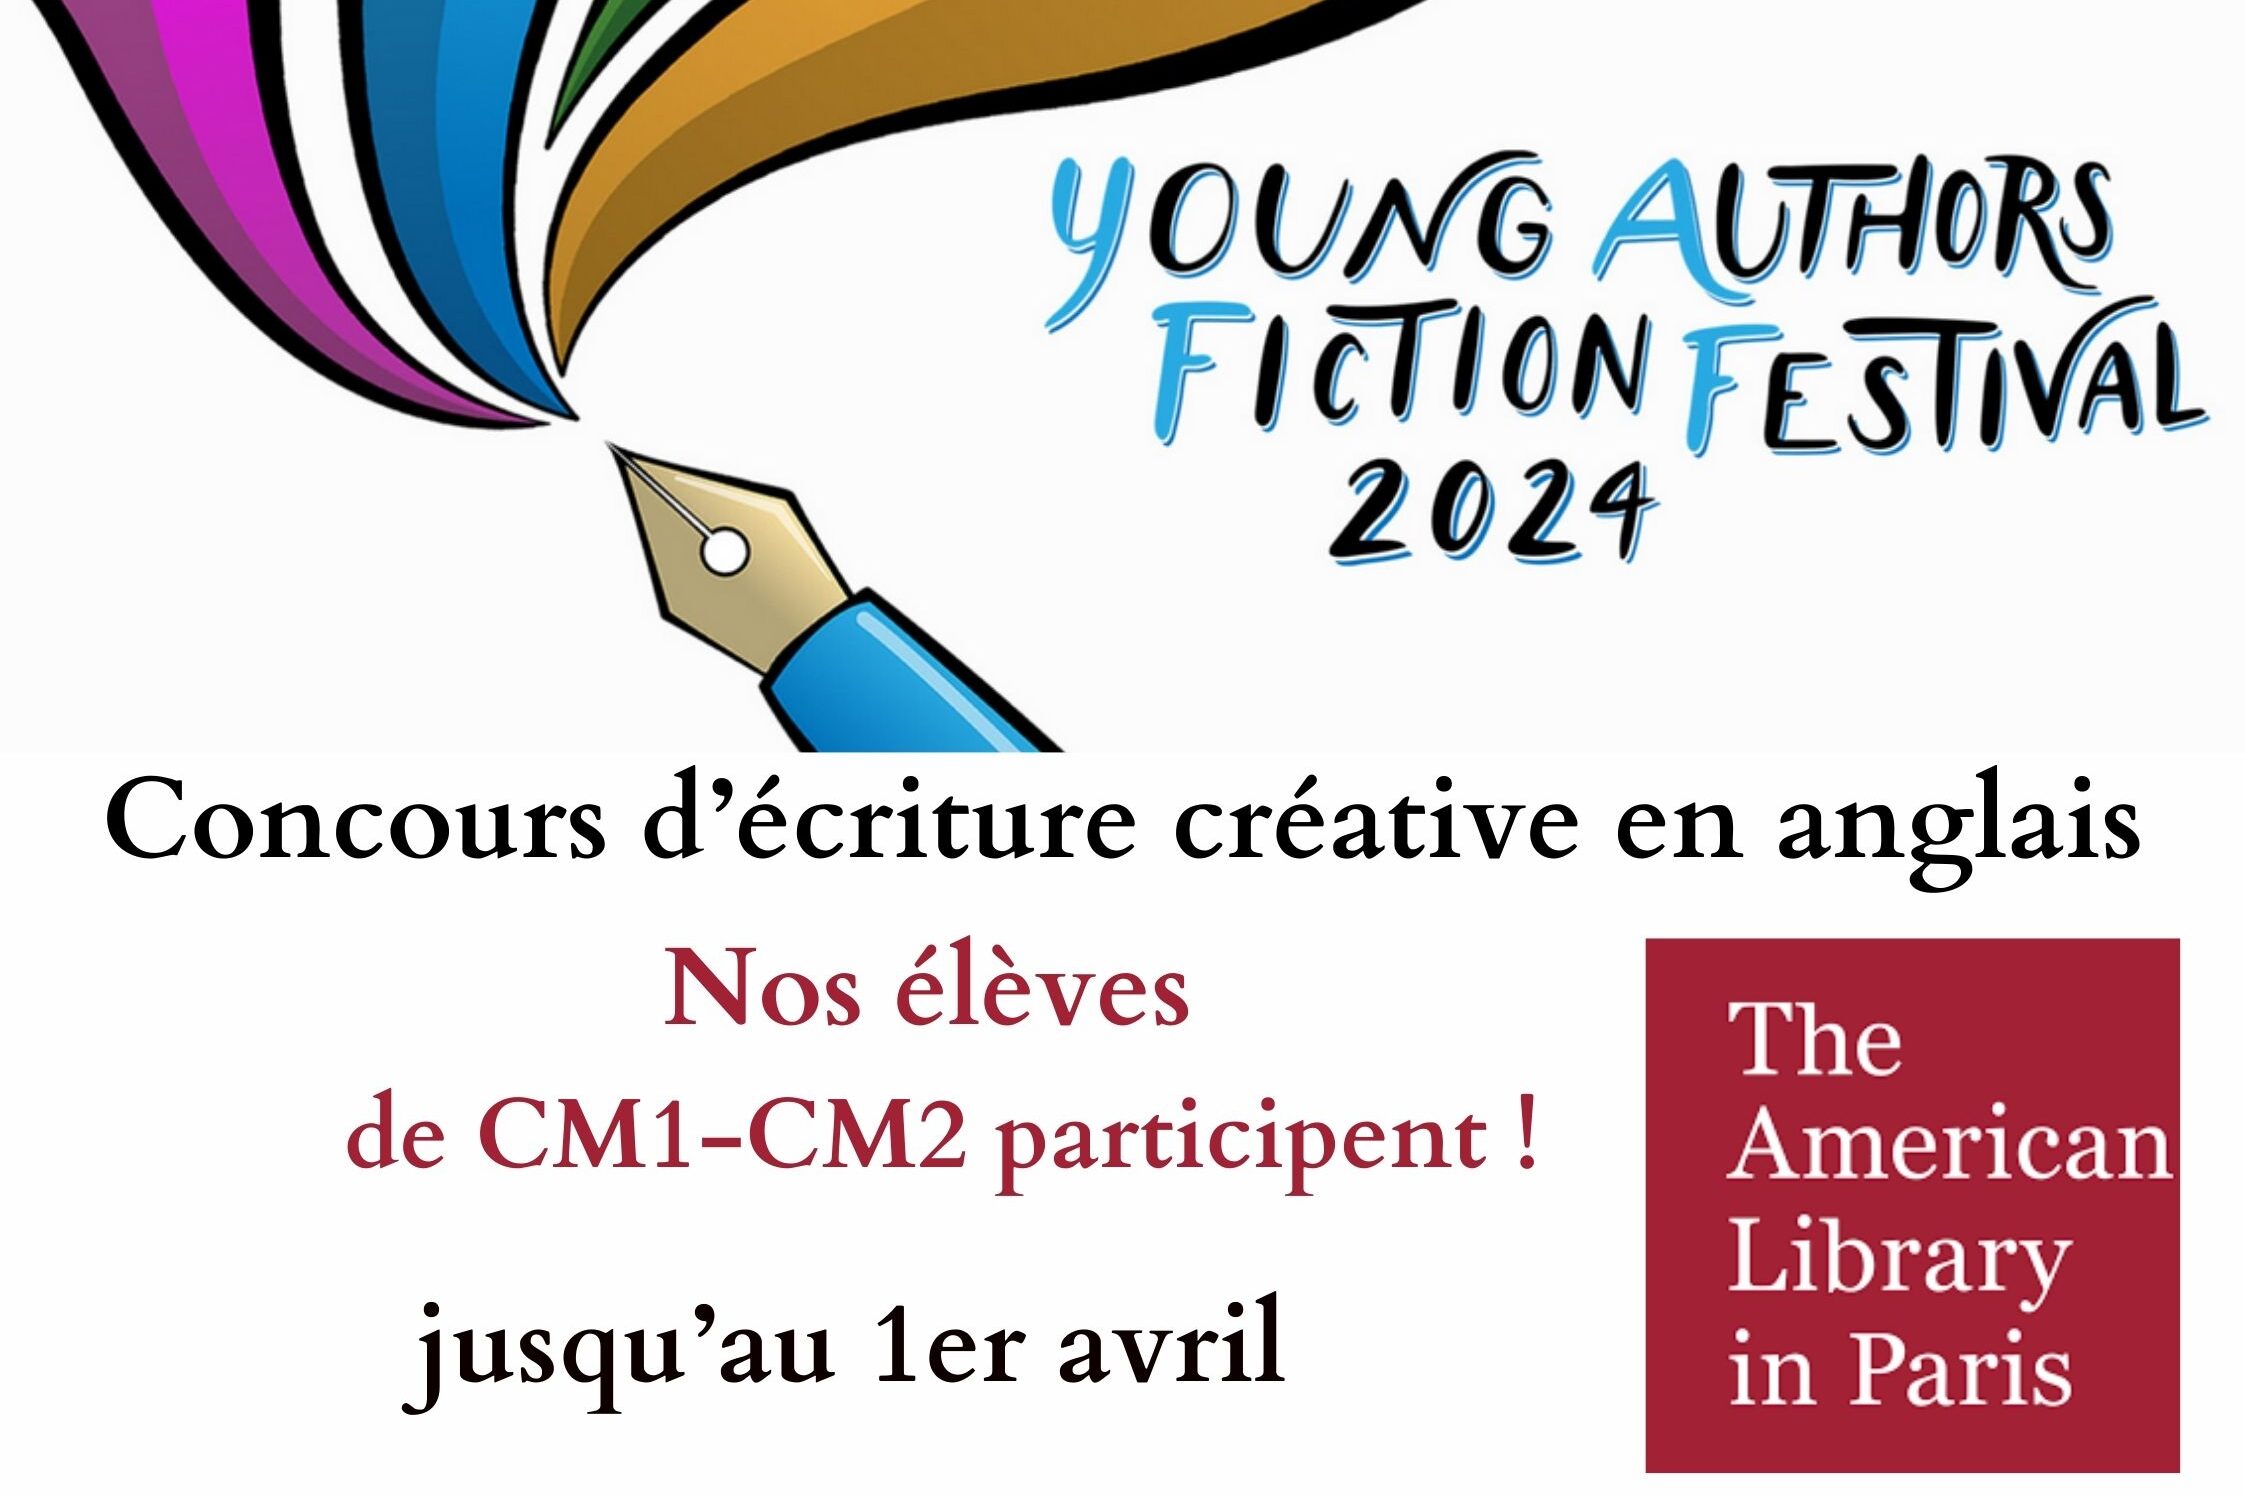 Young Authors Fiction Festival - The American Library in Paris